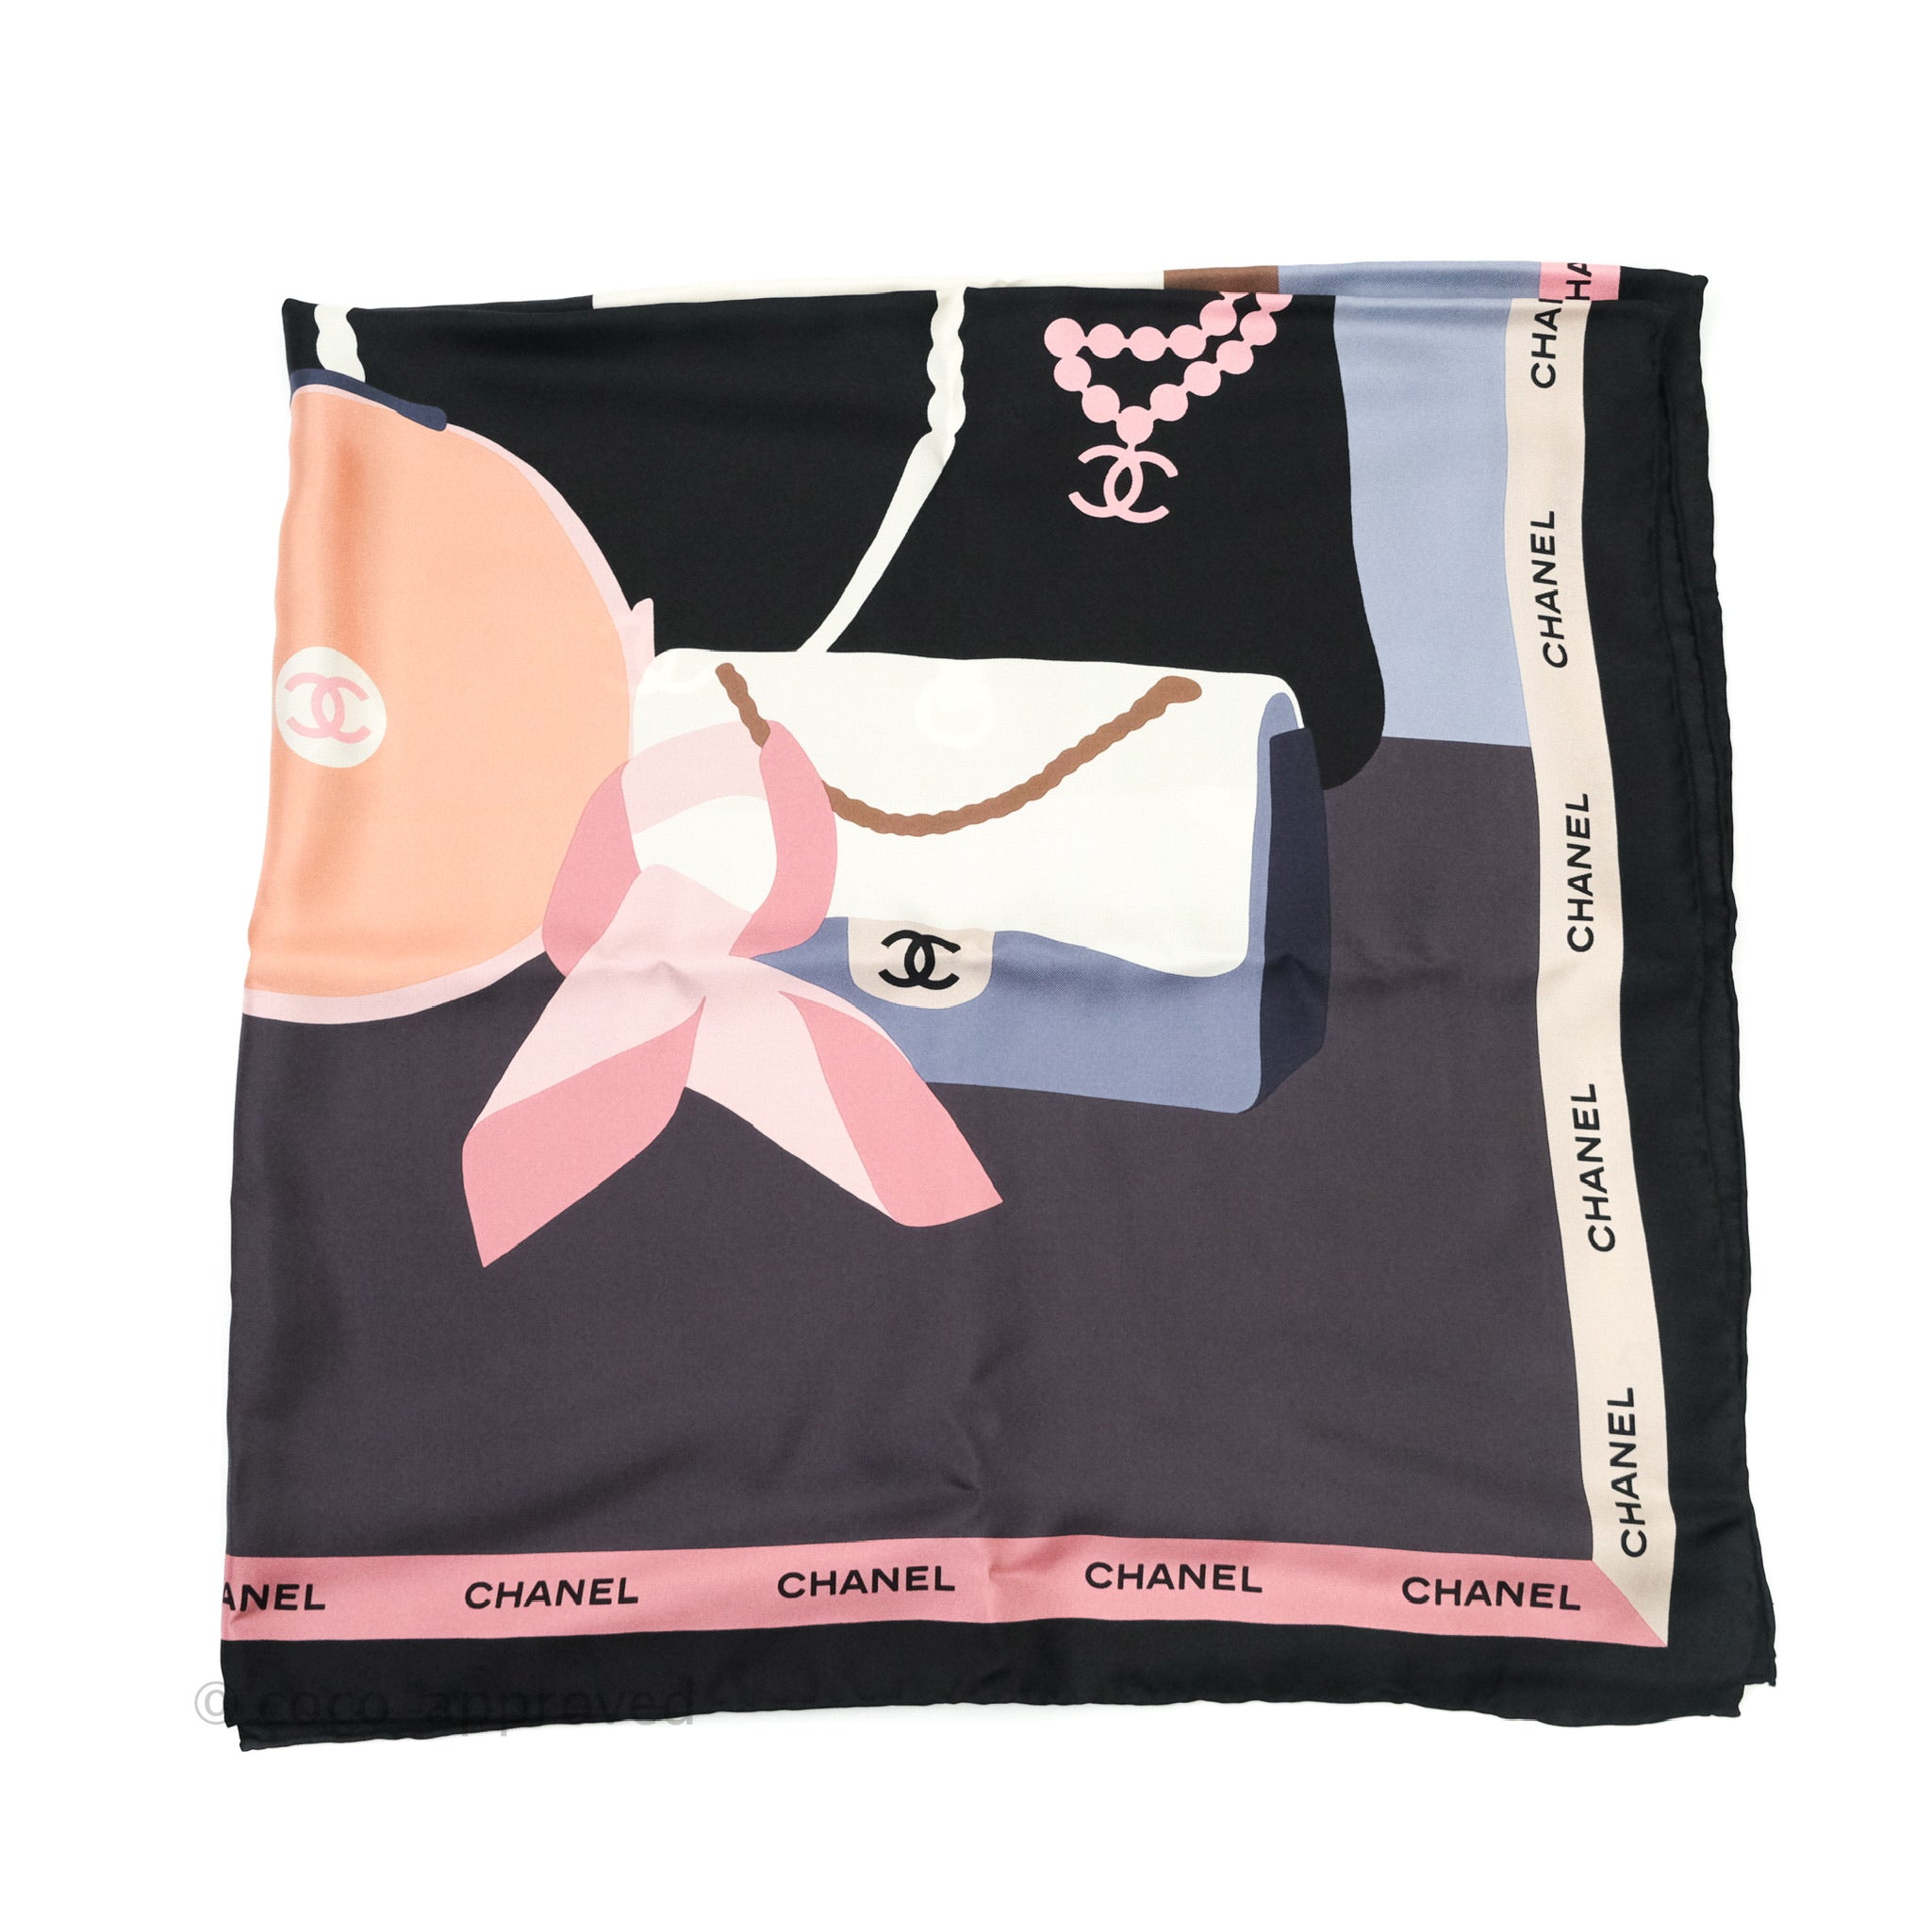 Chanel CC Silk Square Scarf 90 Grey/Pink/White – Coco Approved Studio